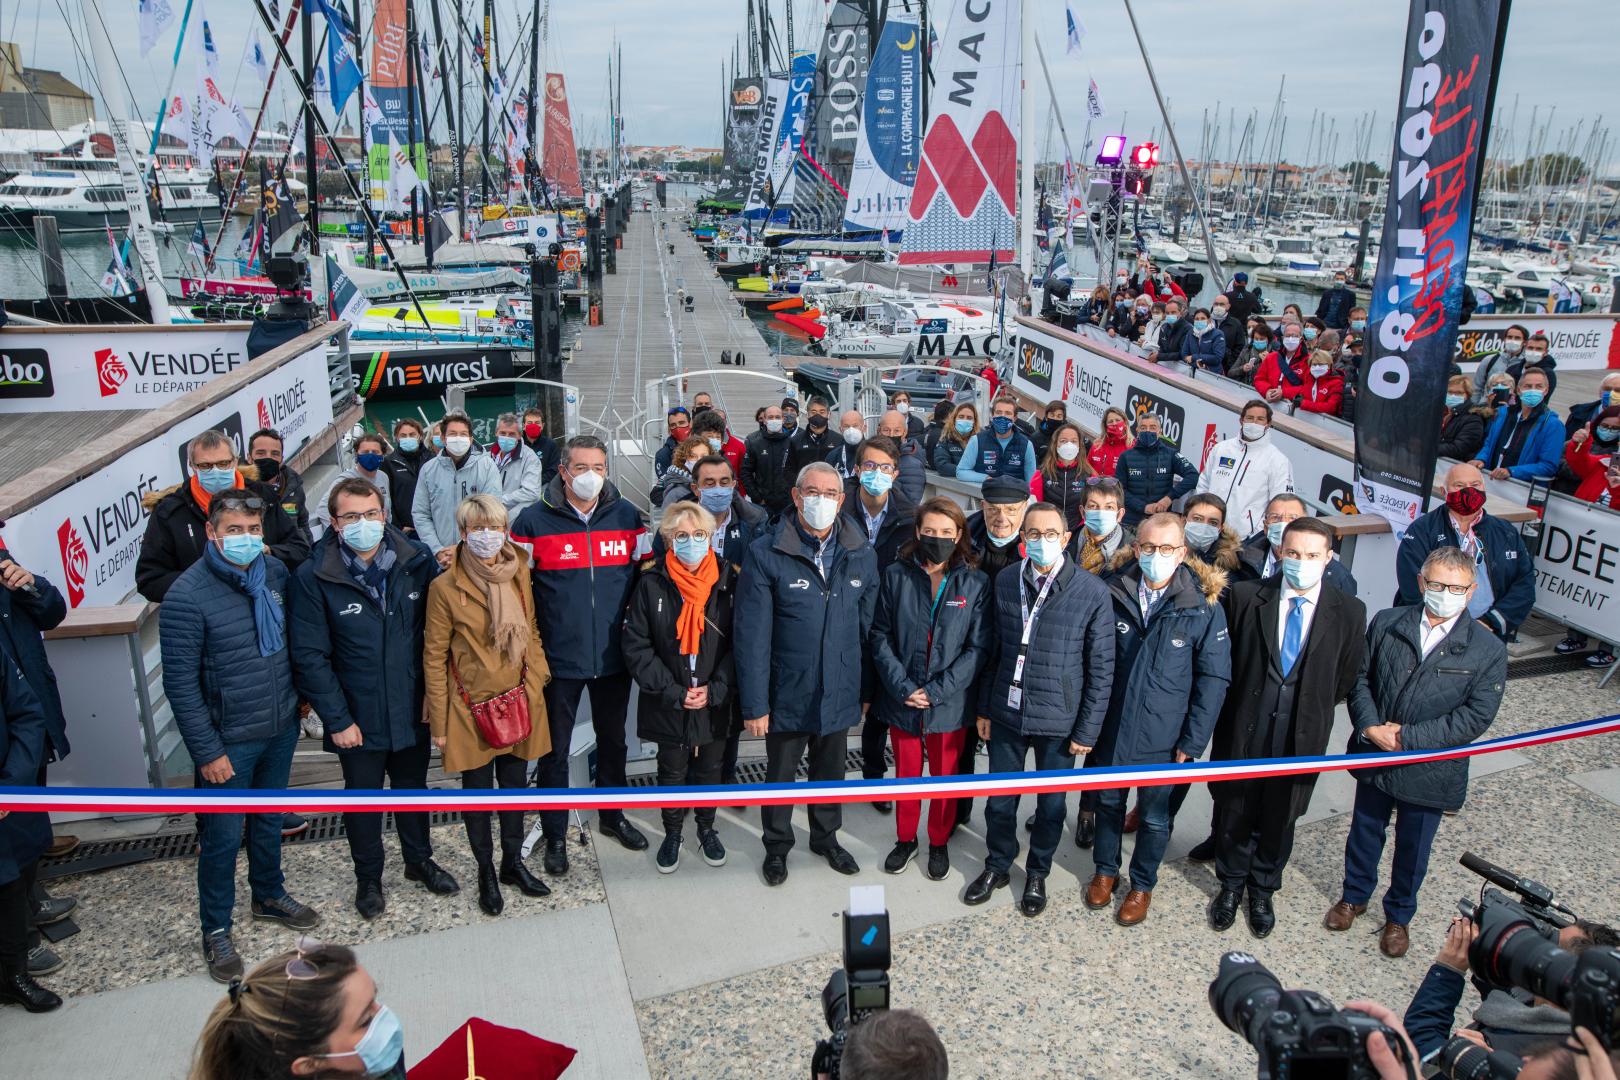 The Start Village for the 9th edition of the Vendée Globe is opened